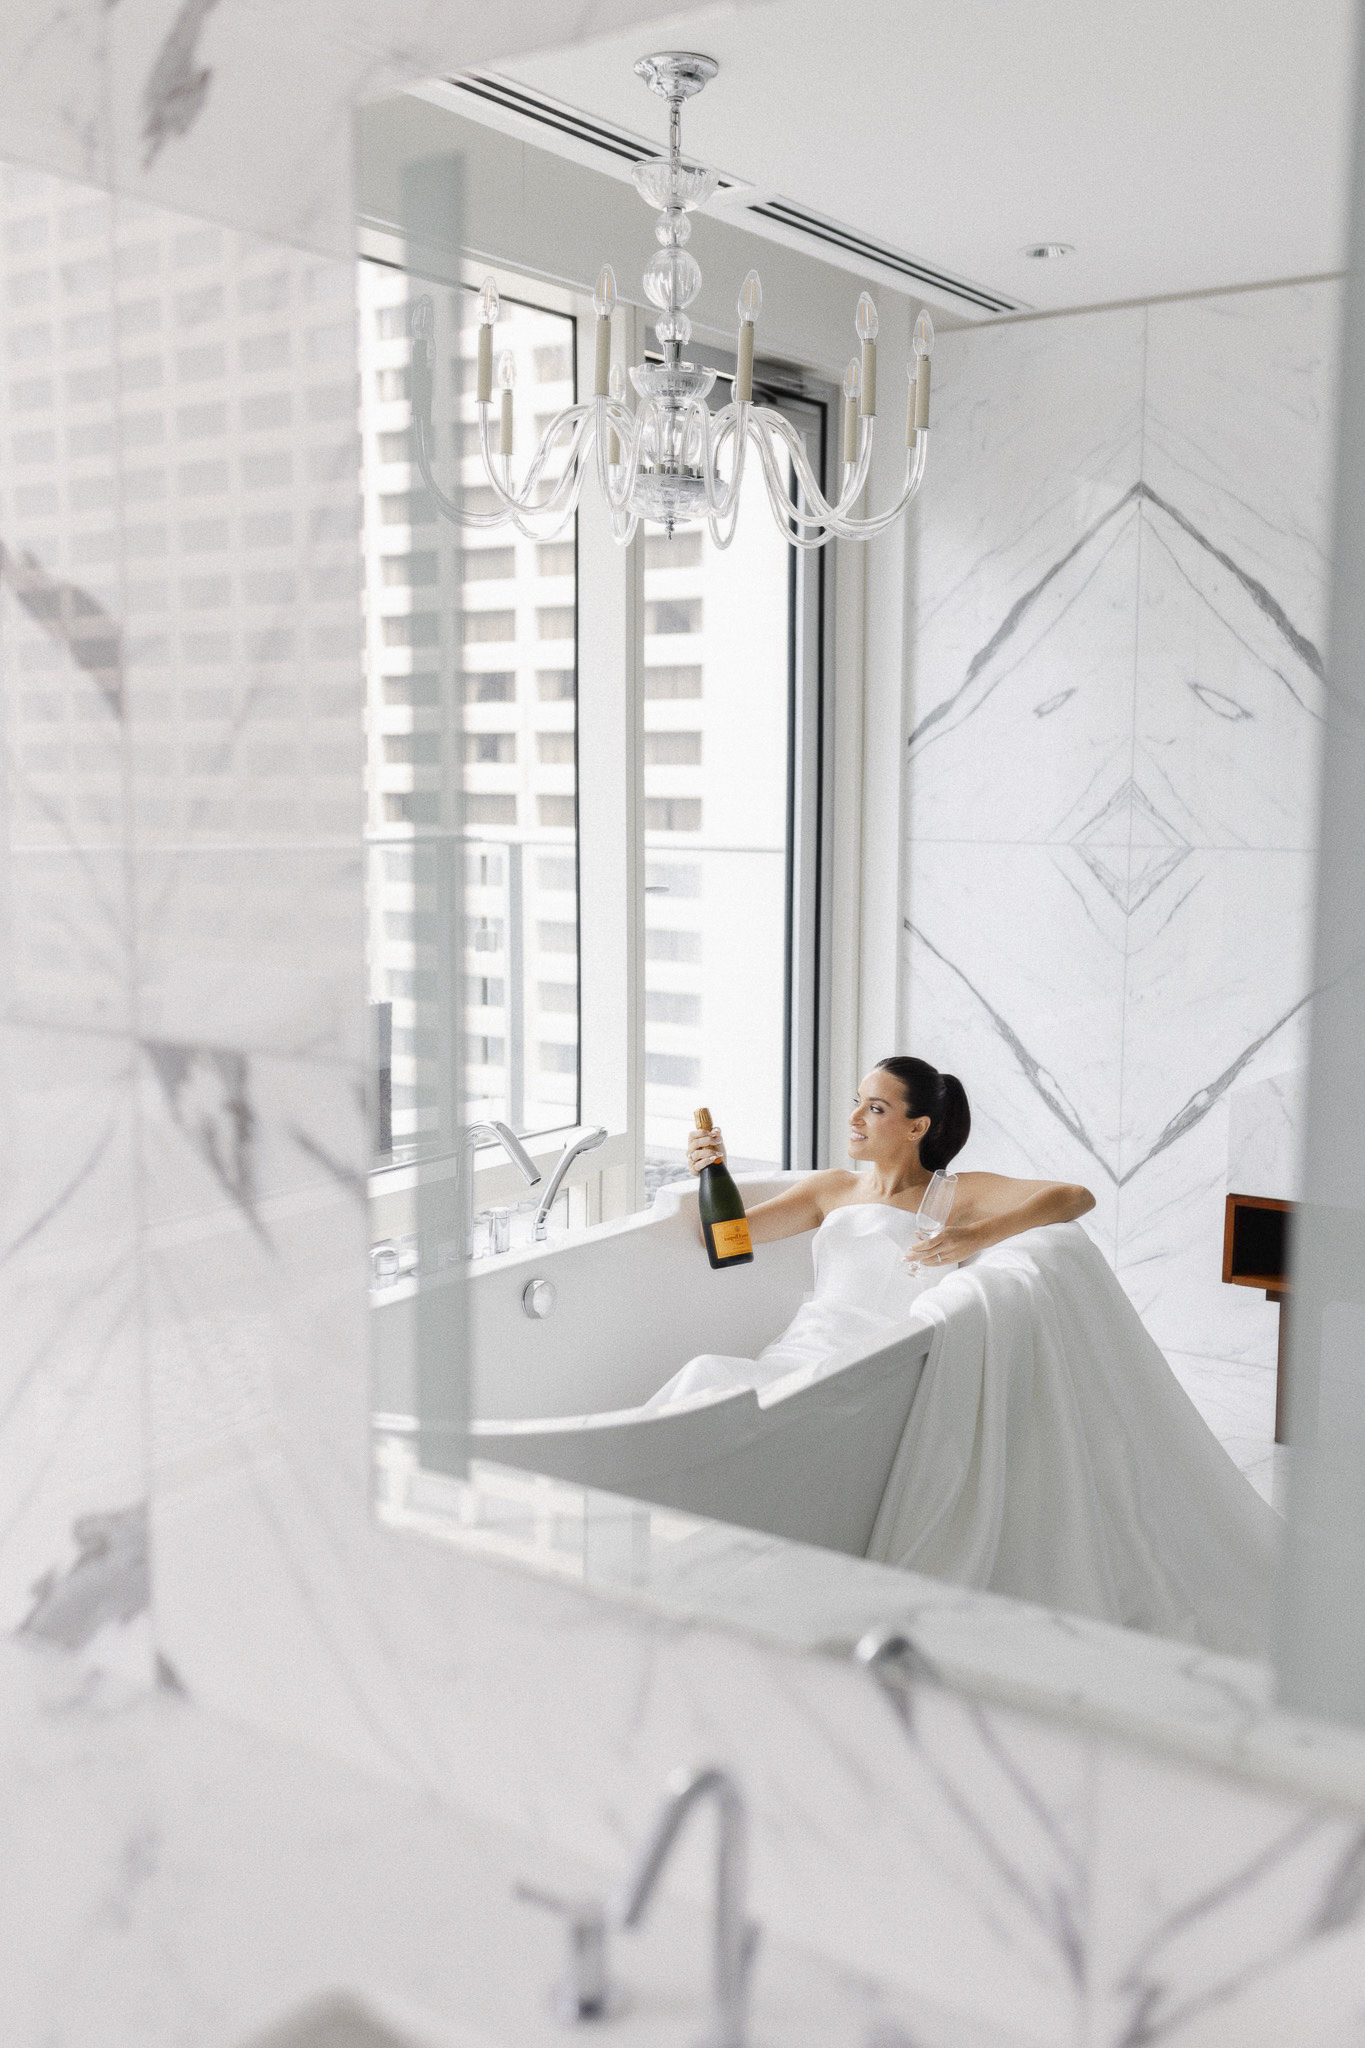 The bride in a wedding dress holding a bottle of champagne in a white bathtub, shot through a mirror reflection.